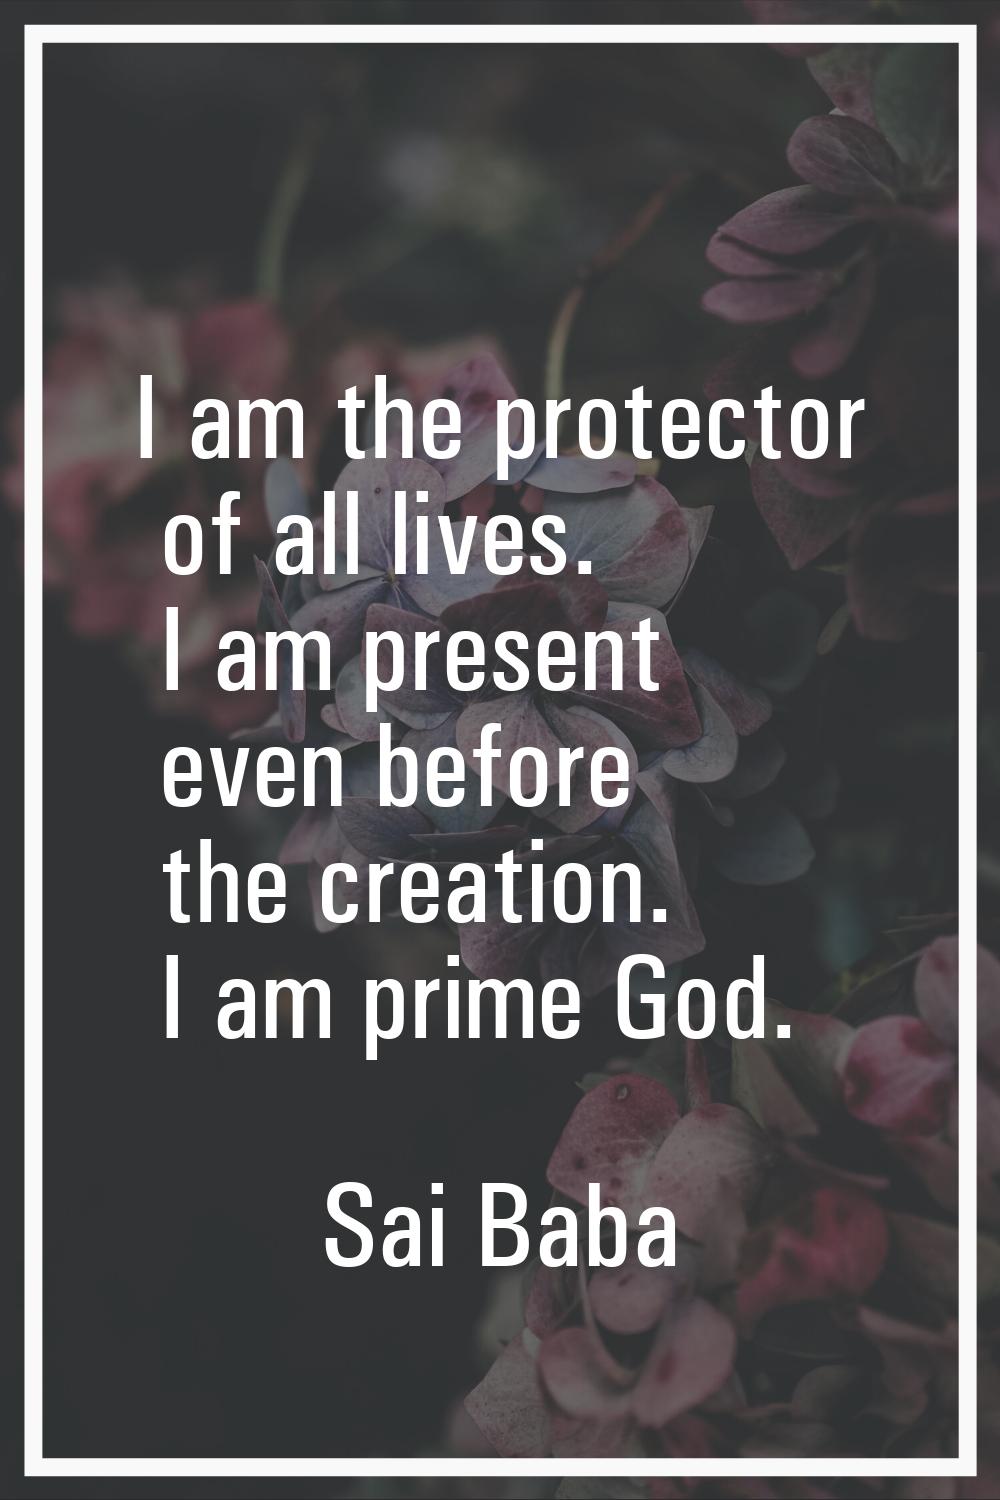 I am the protector of all lives. I am present even before the creation. I am prime God.